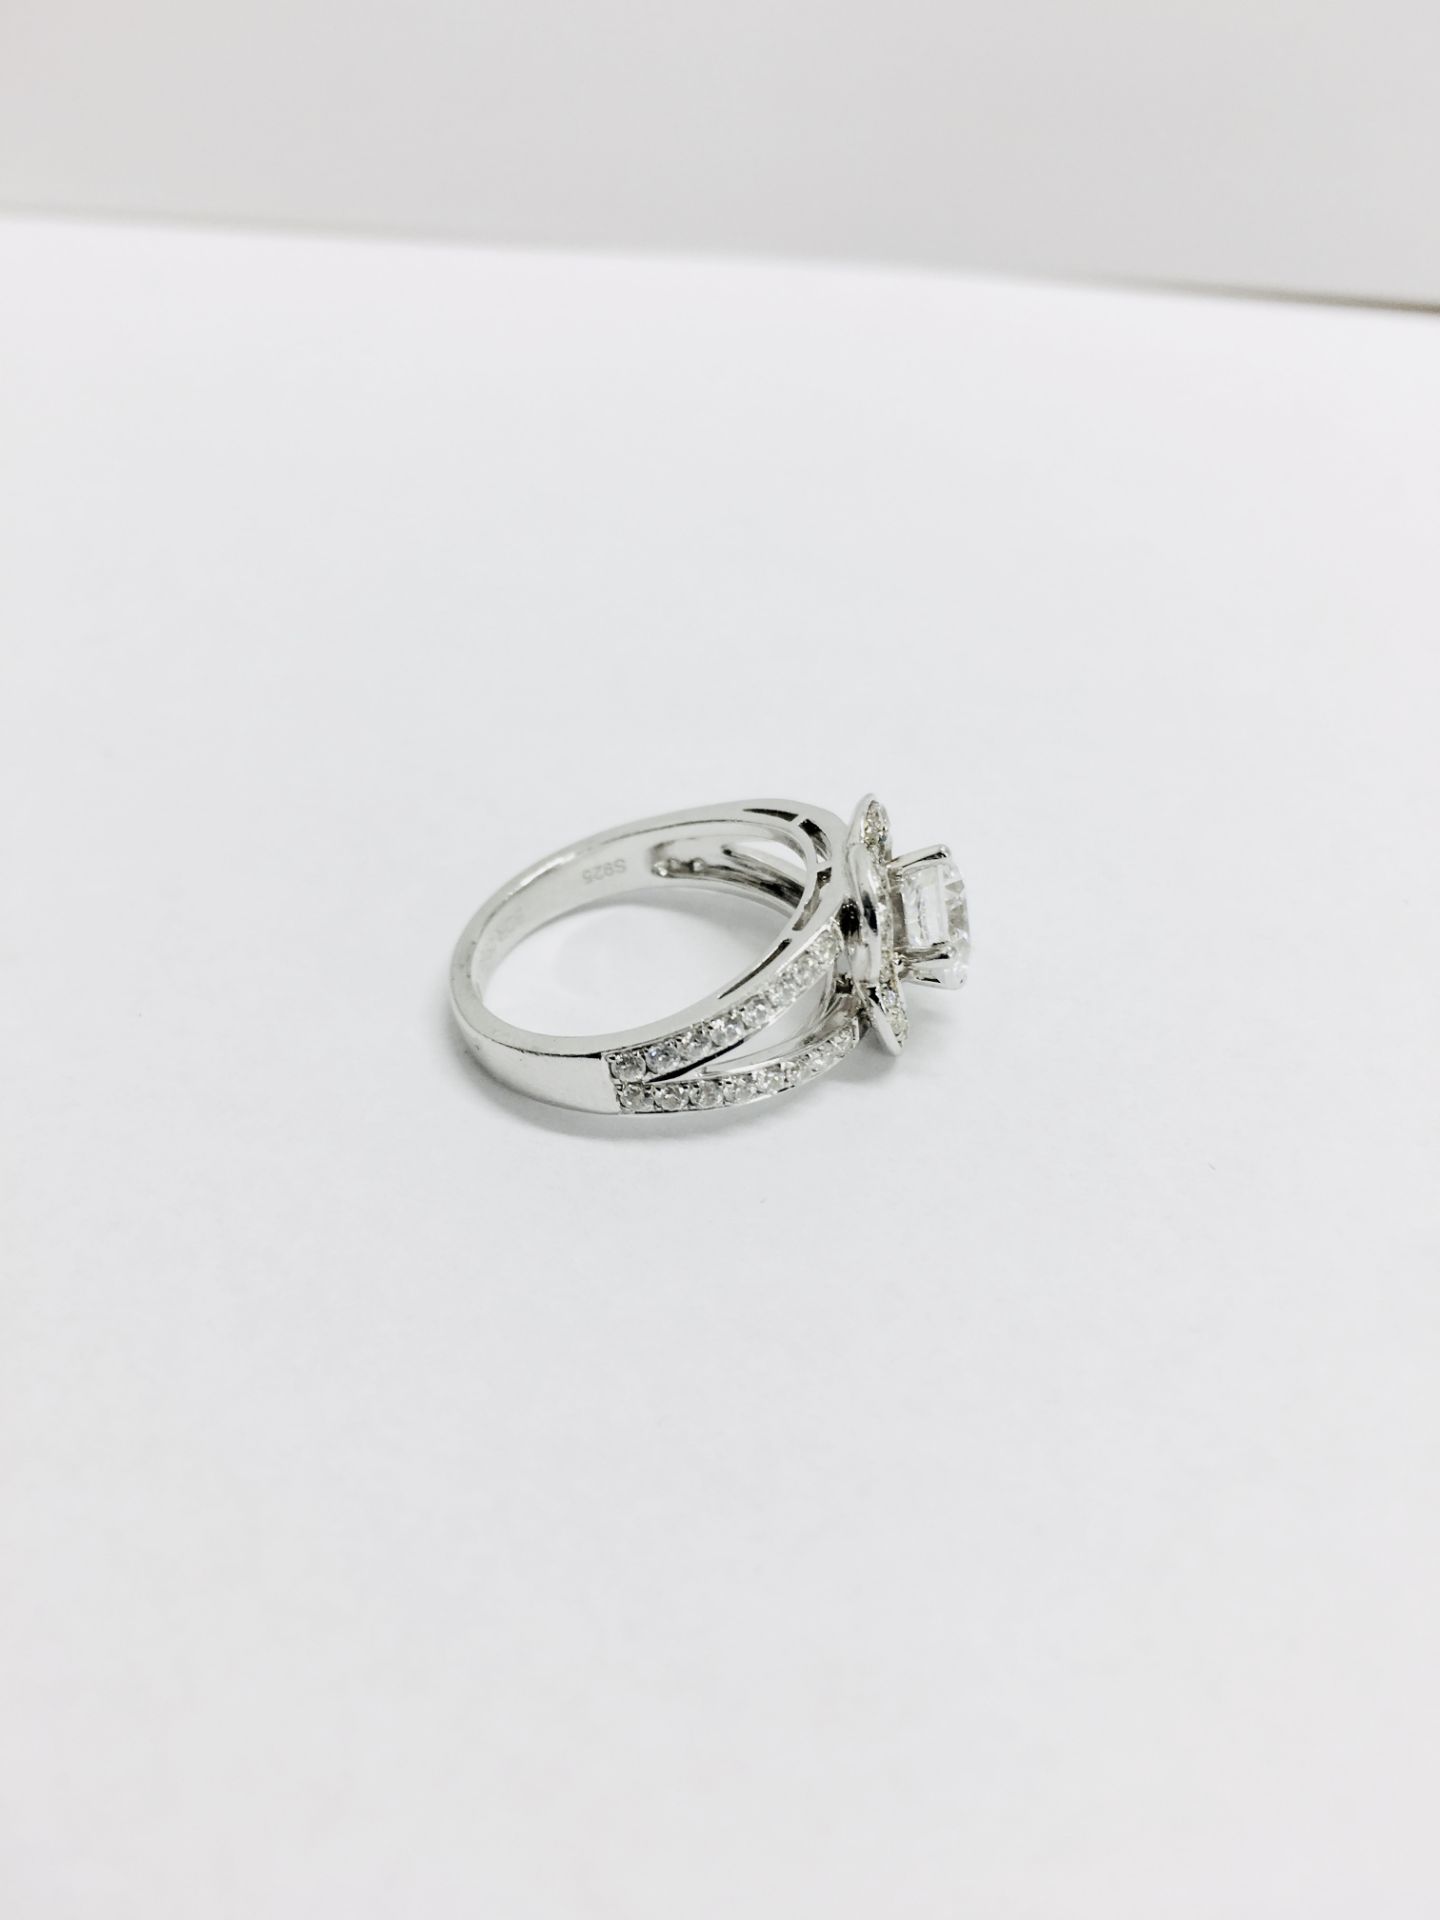 1.04ct diamond set soliatire ring in platinum. H colour and I1 clarity. Halo setting small - Image 4 of 4